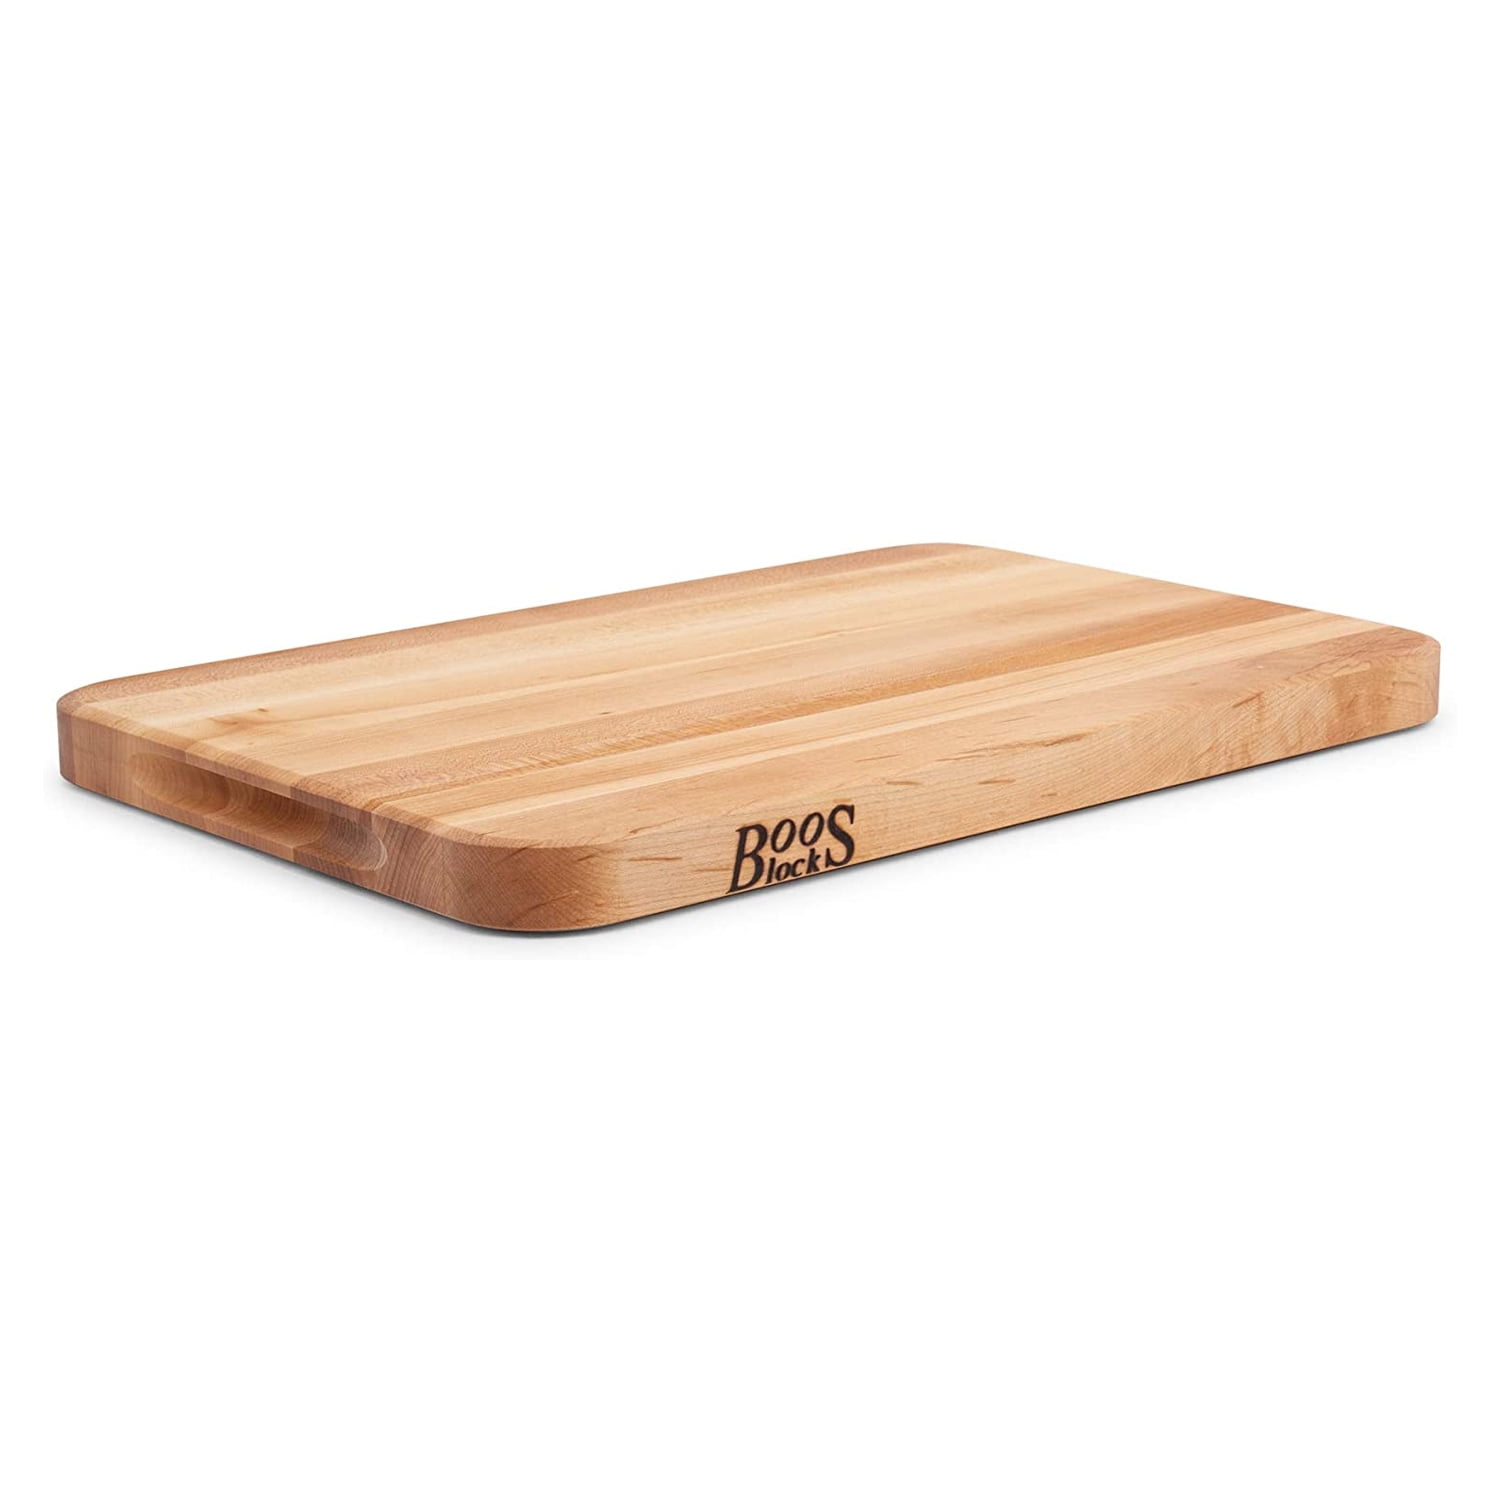 Details about   John Boos Maple Wood Edge Grain Reversible Cutting Board 18 x 12 x 1.5 Inches 